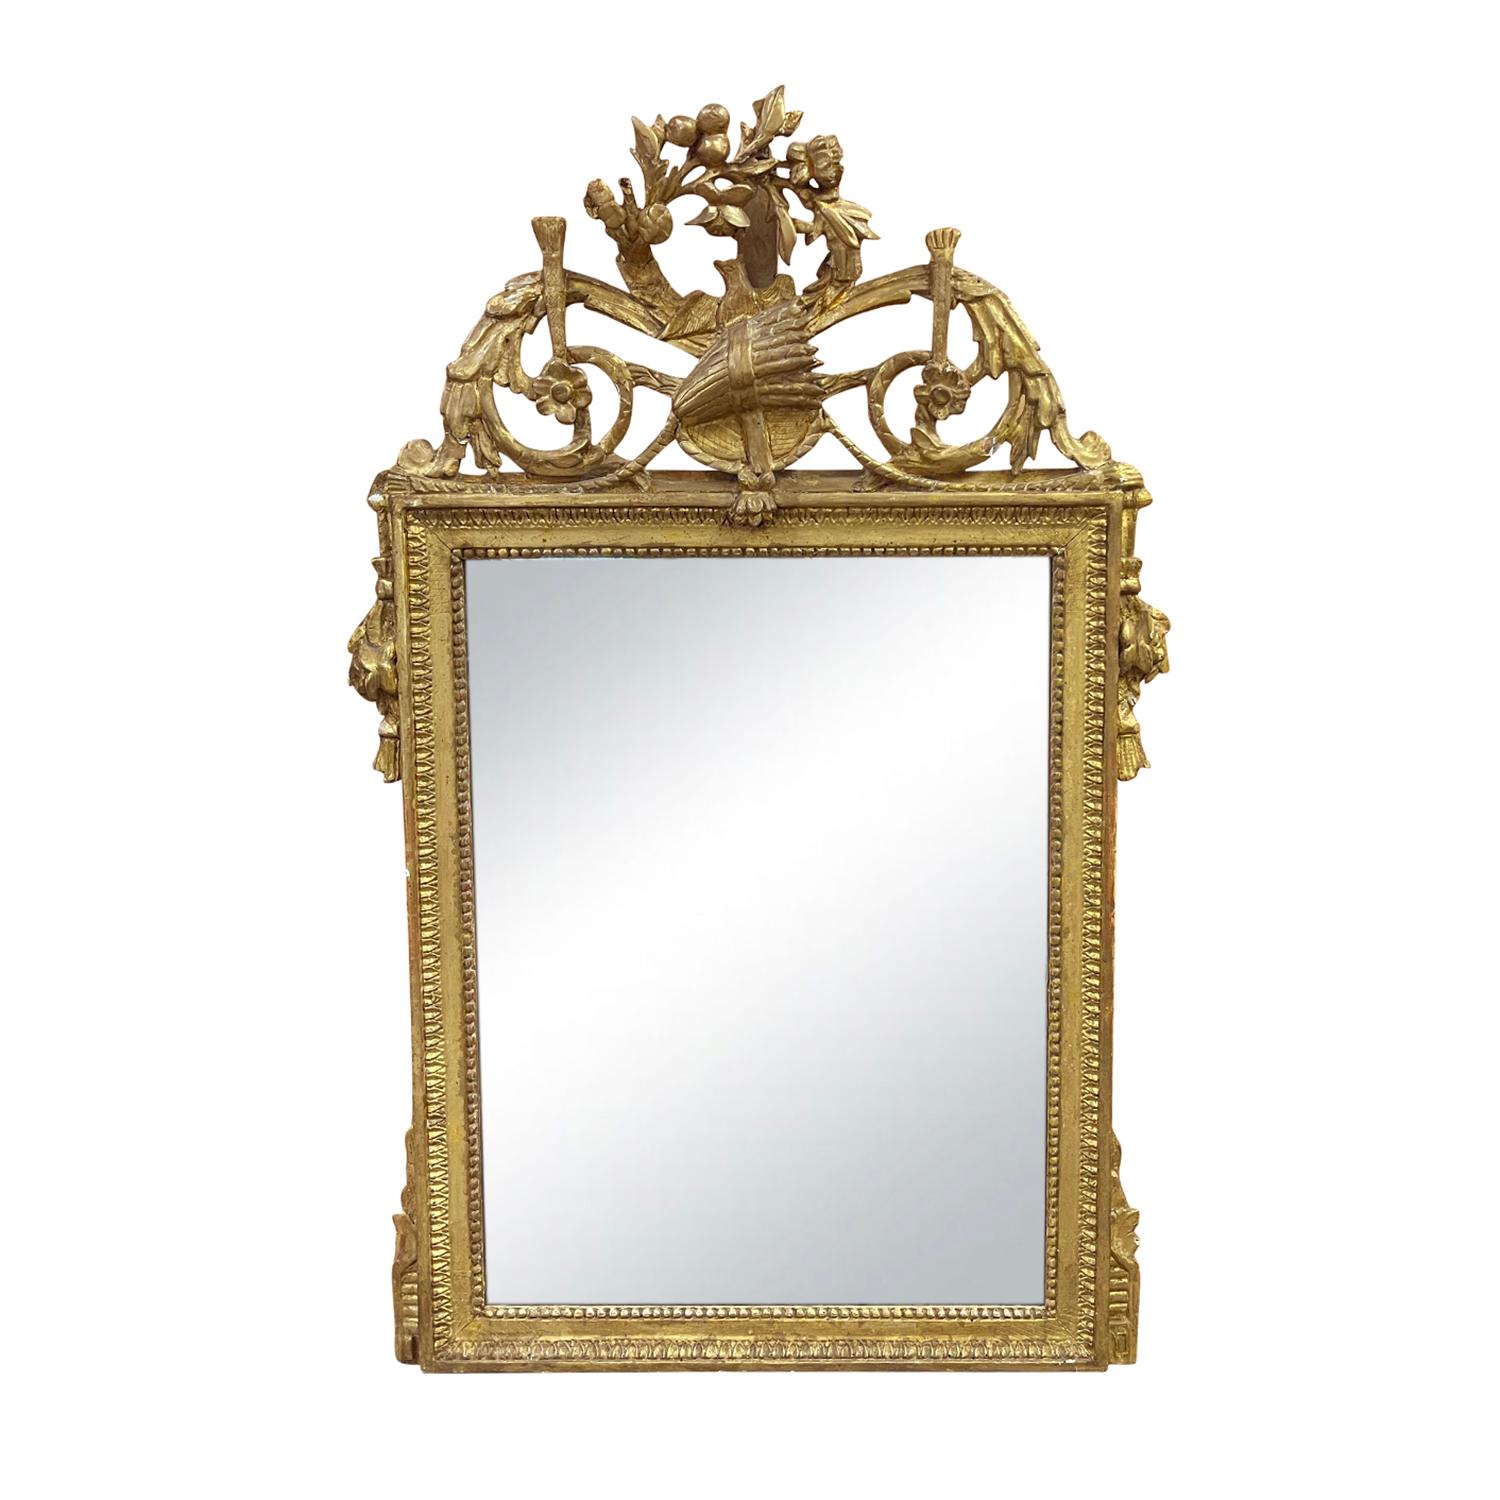 Late 18th Century, an antique Louis Seize period mirror in carved wood with gilded accents and foliage motifs, consisting its original mirror glass in good condition. Created in France during the reign of Louis XVI. The frame features an exquisite